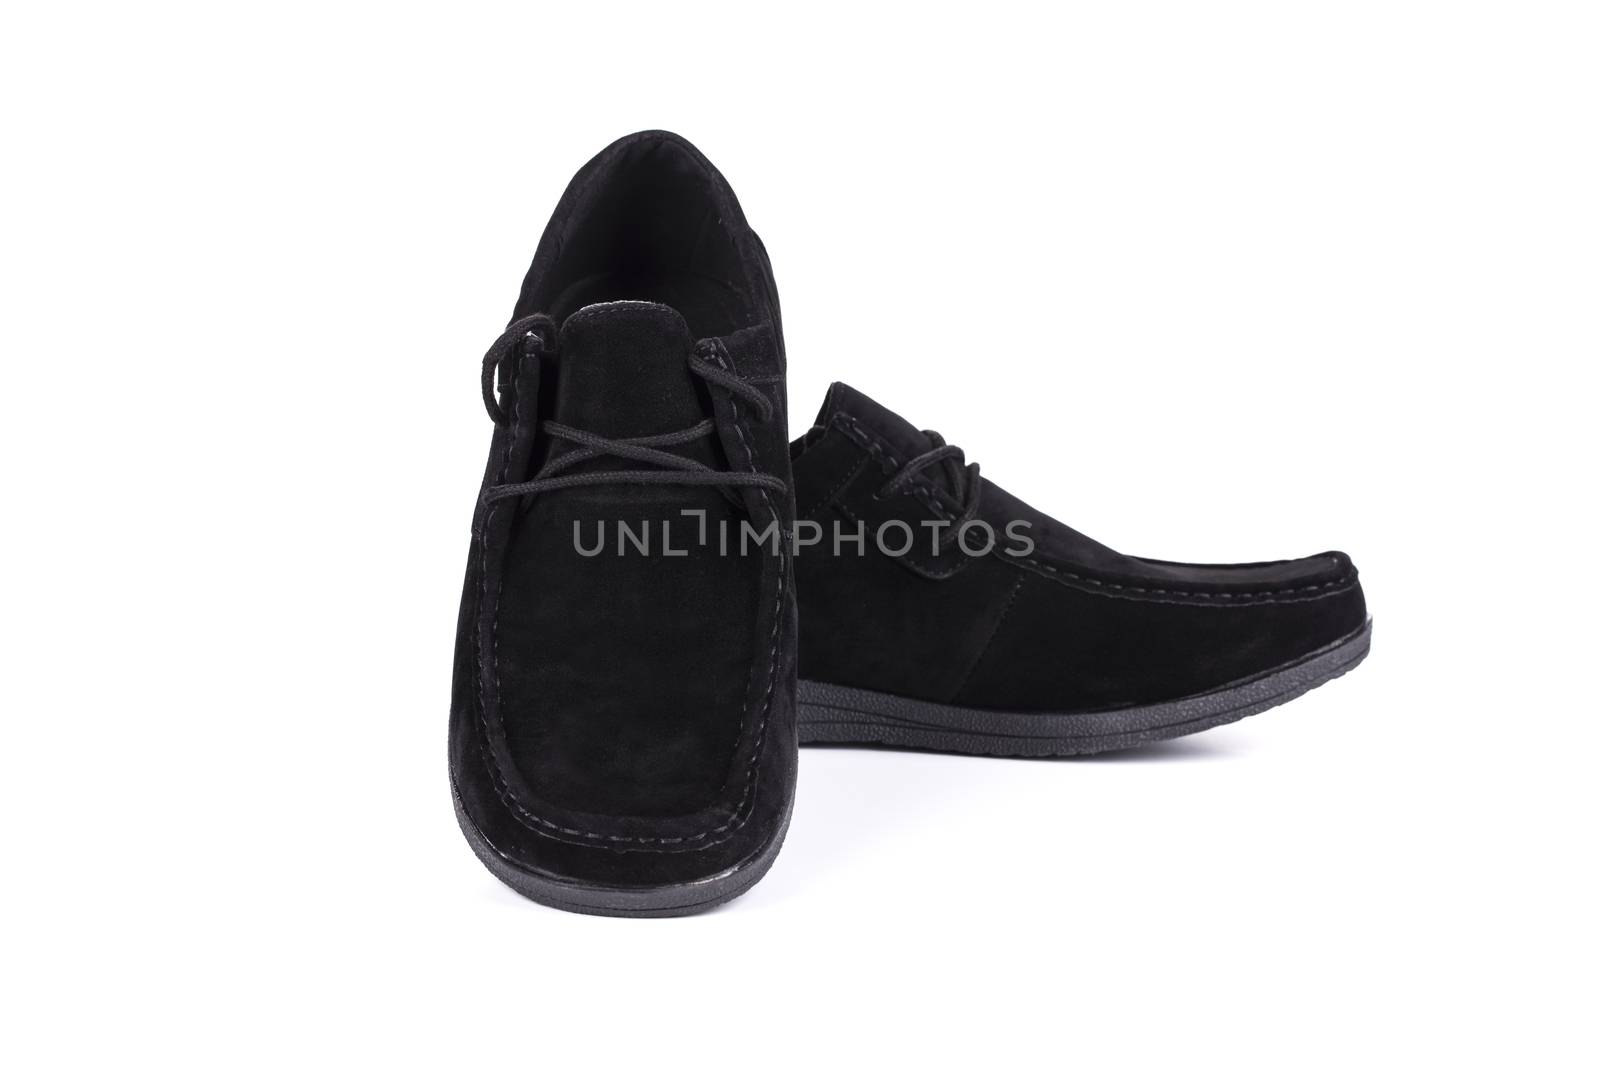 Male shoes on white background